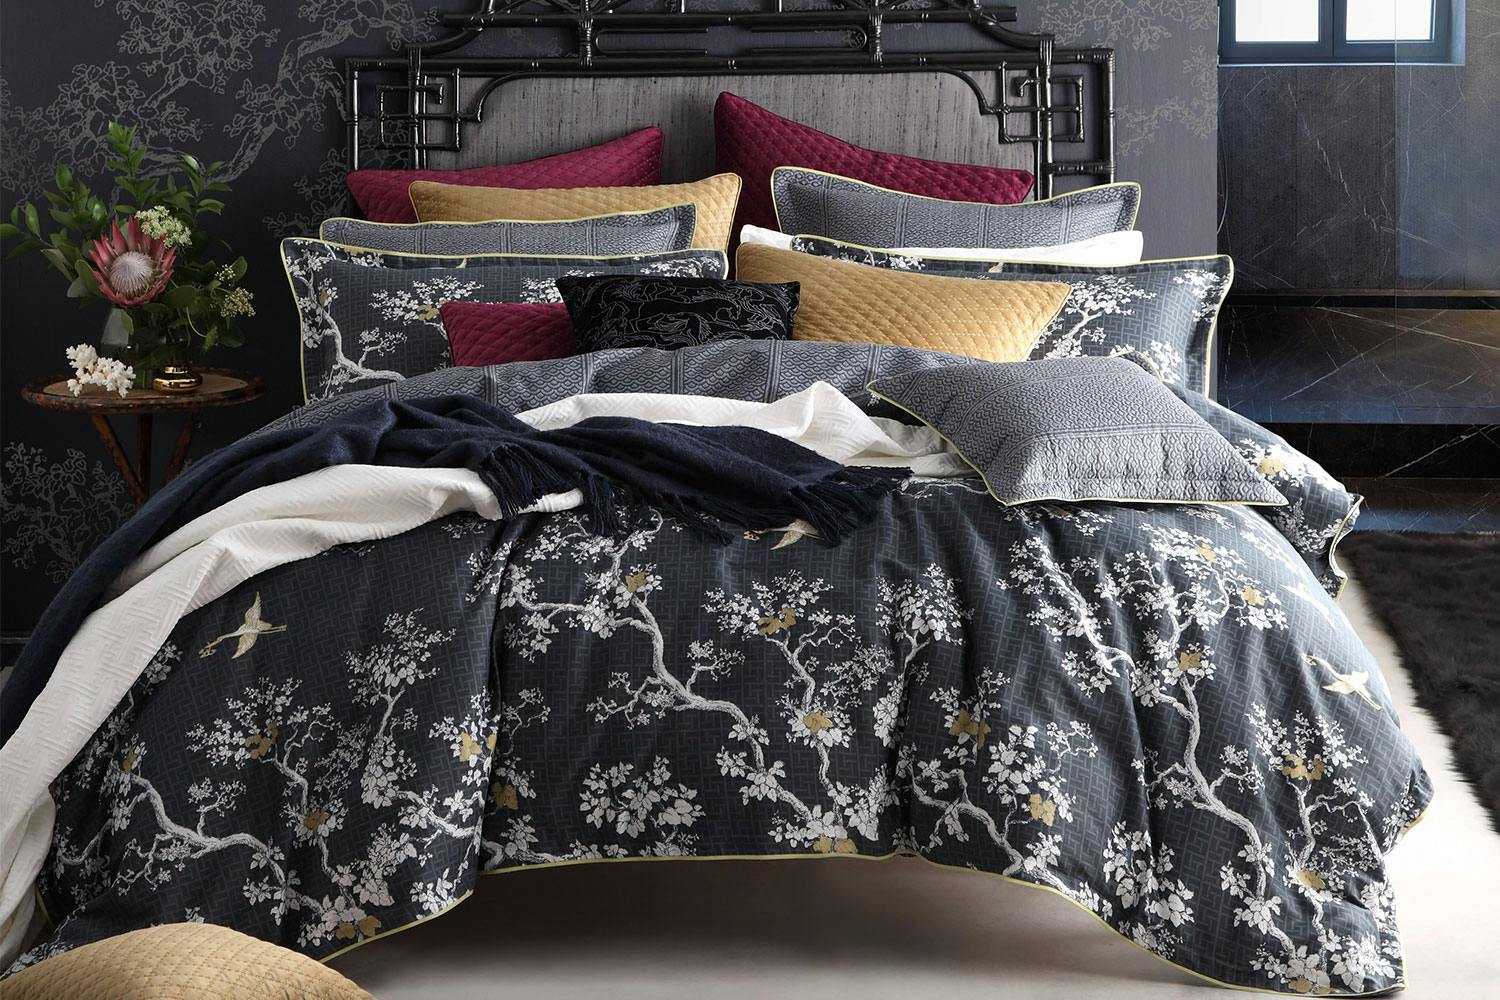 The Cranes Charcoal Duvet Cover Set By Florence Broadhurst